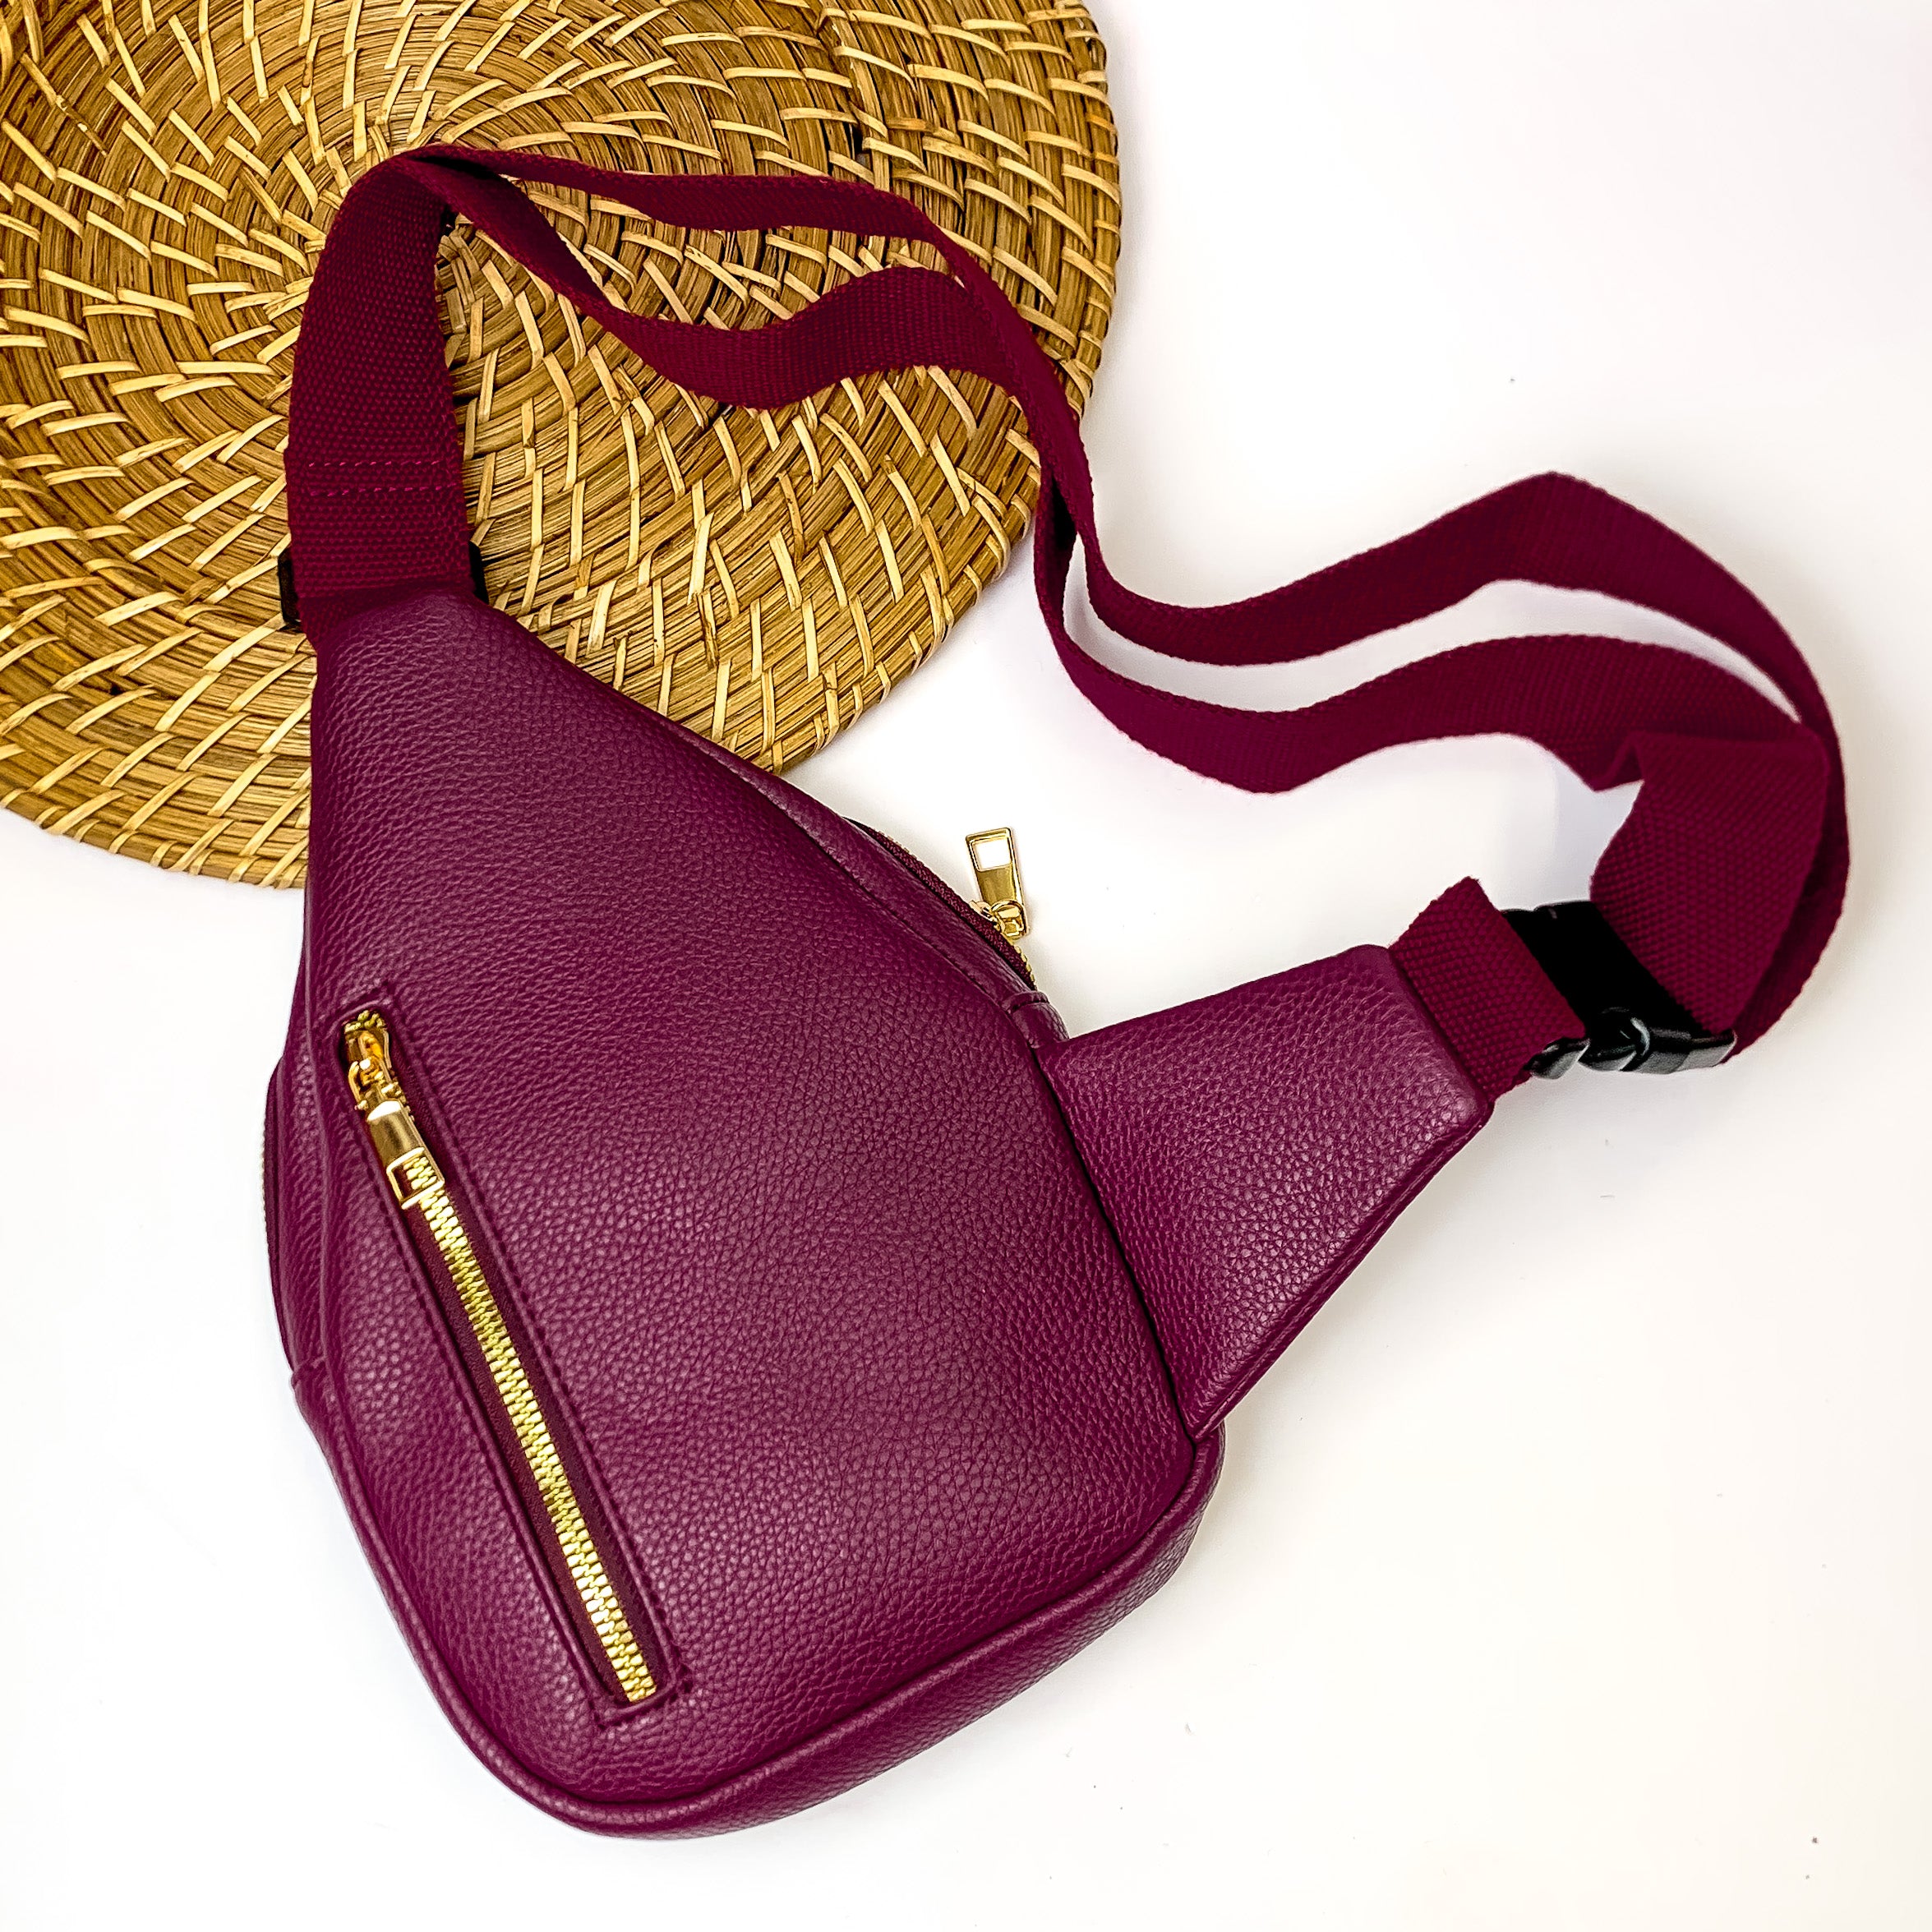 Sling Backpack in Wine Red - Giddy Up Glamour Boutique